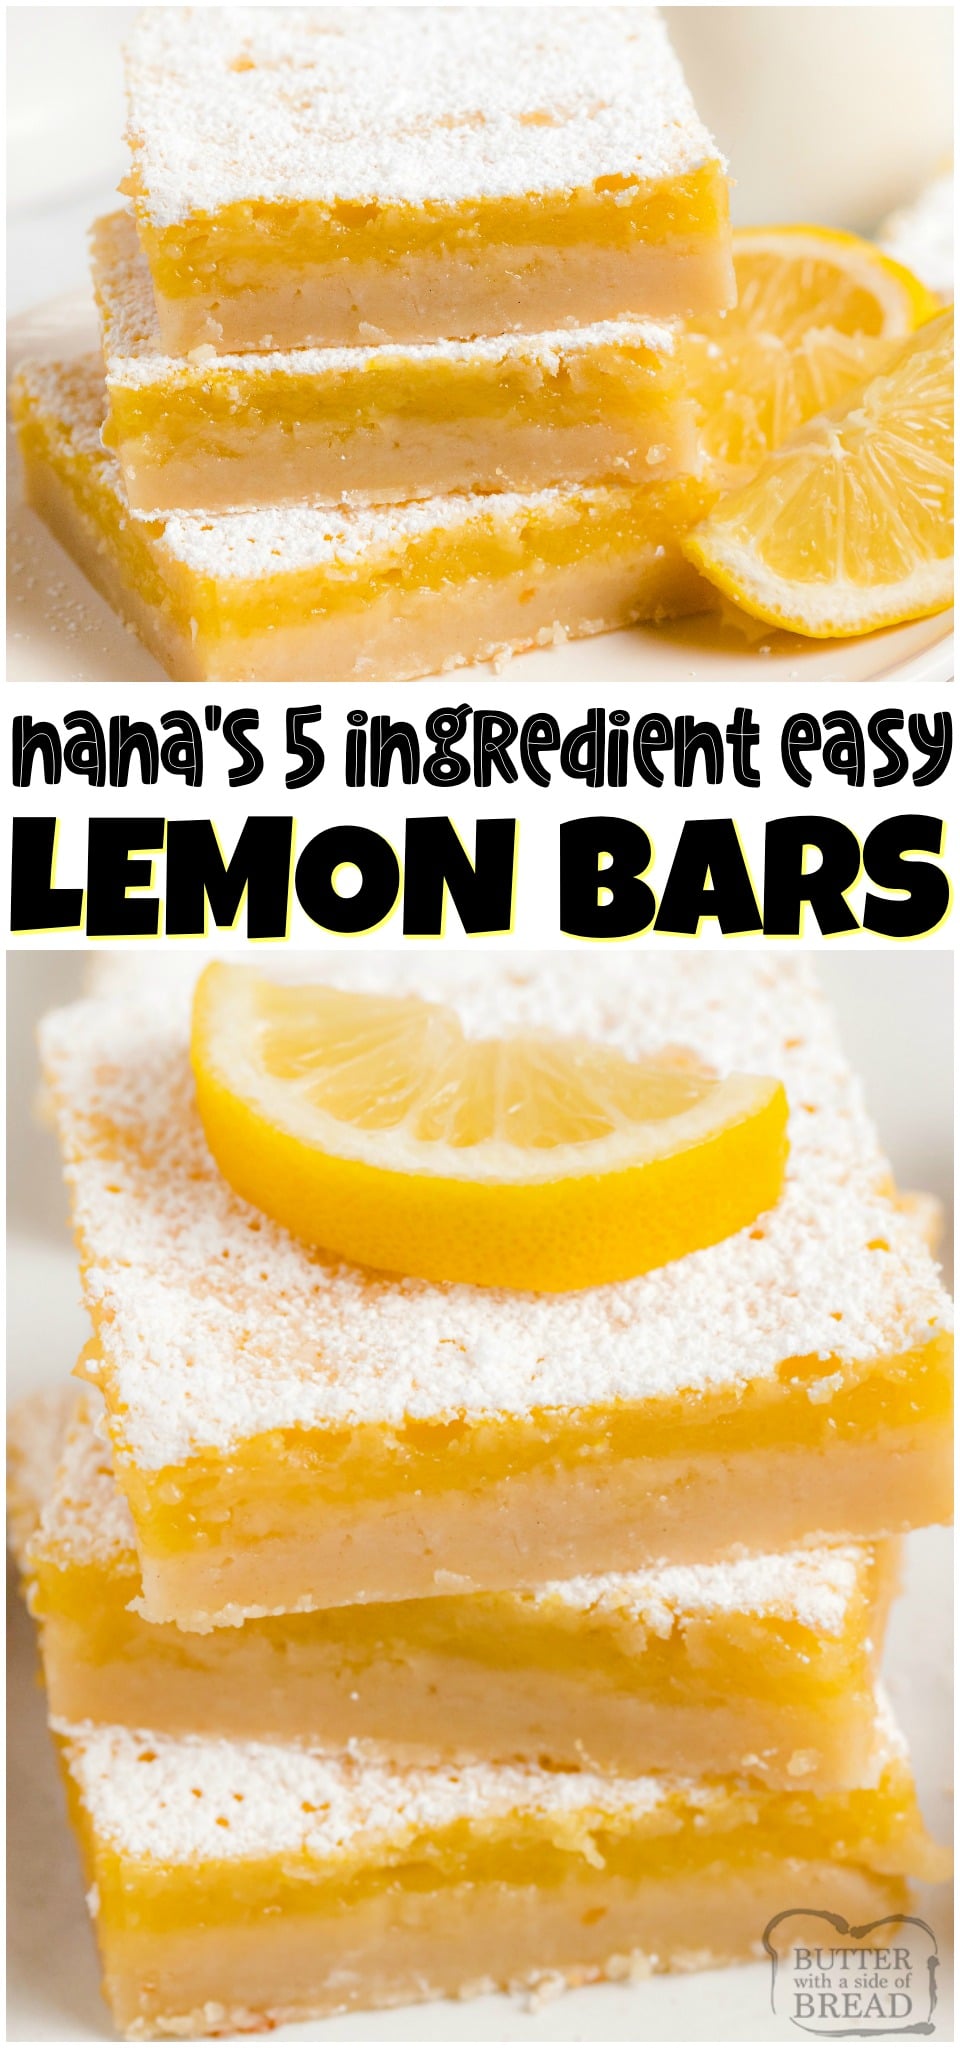 Easy Lemon Bars made with just 5 ingredients! Homemade Lemon Bars recipe made with butter, sugar, eggs and lemon juice for a tasty, tangy lemon dessert! 